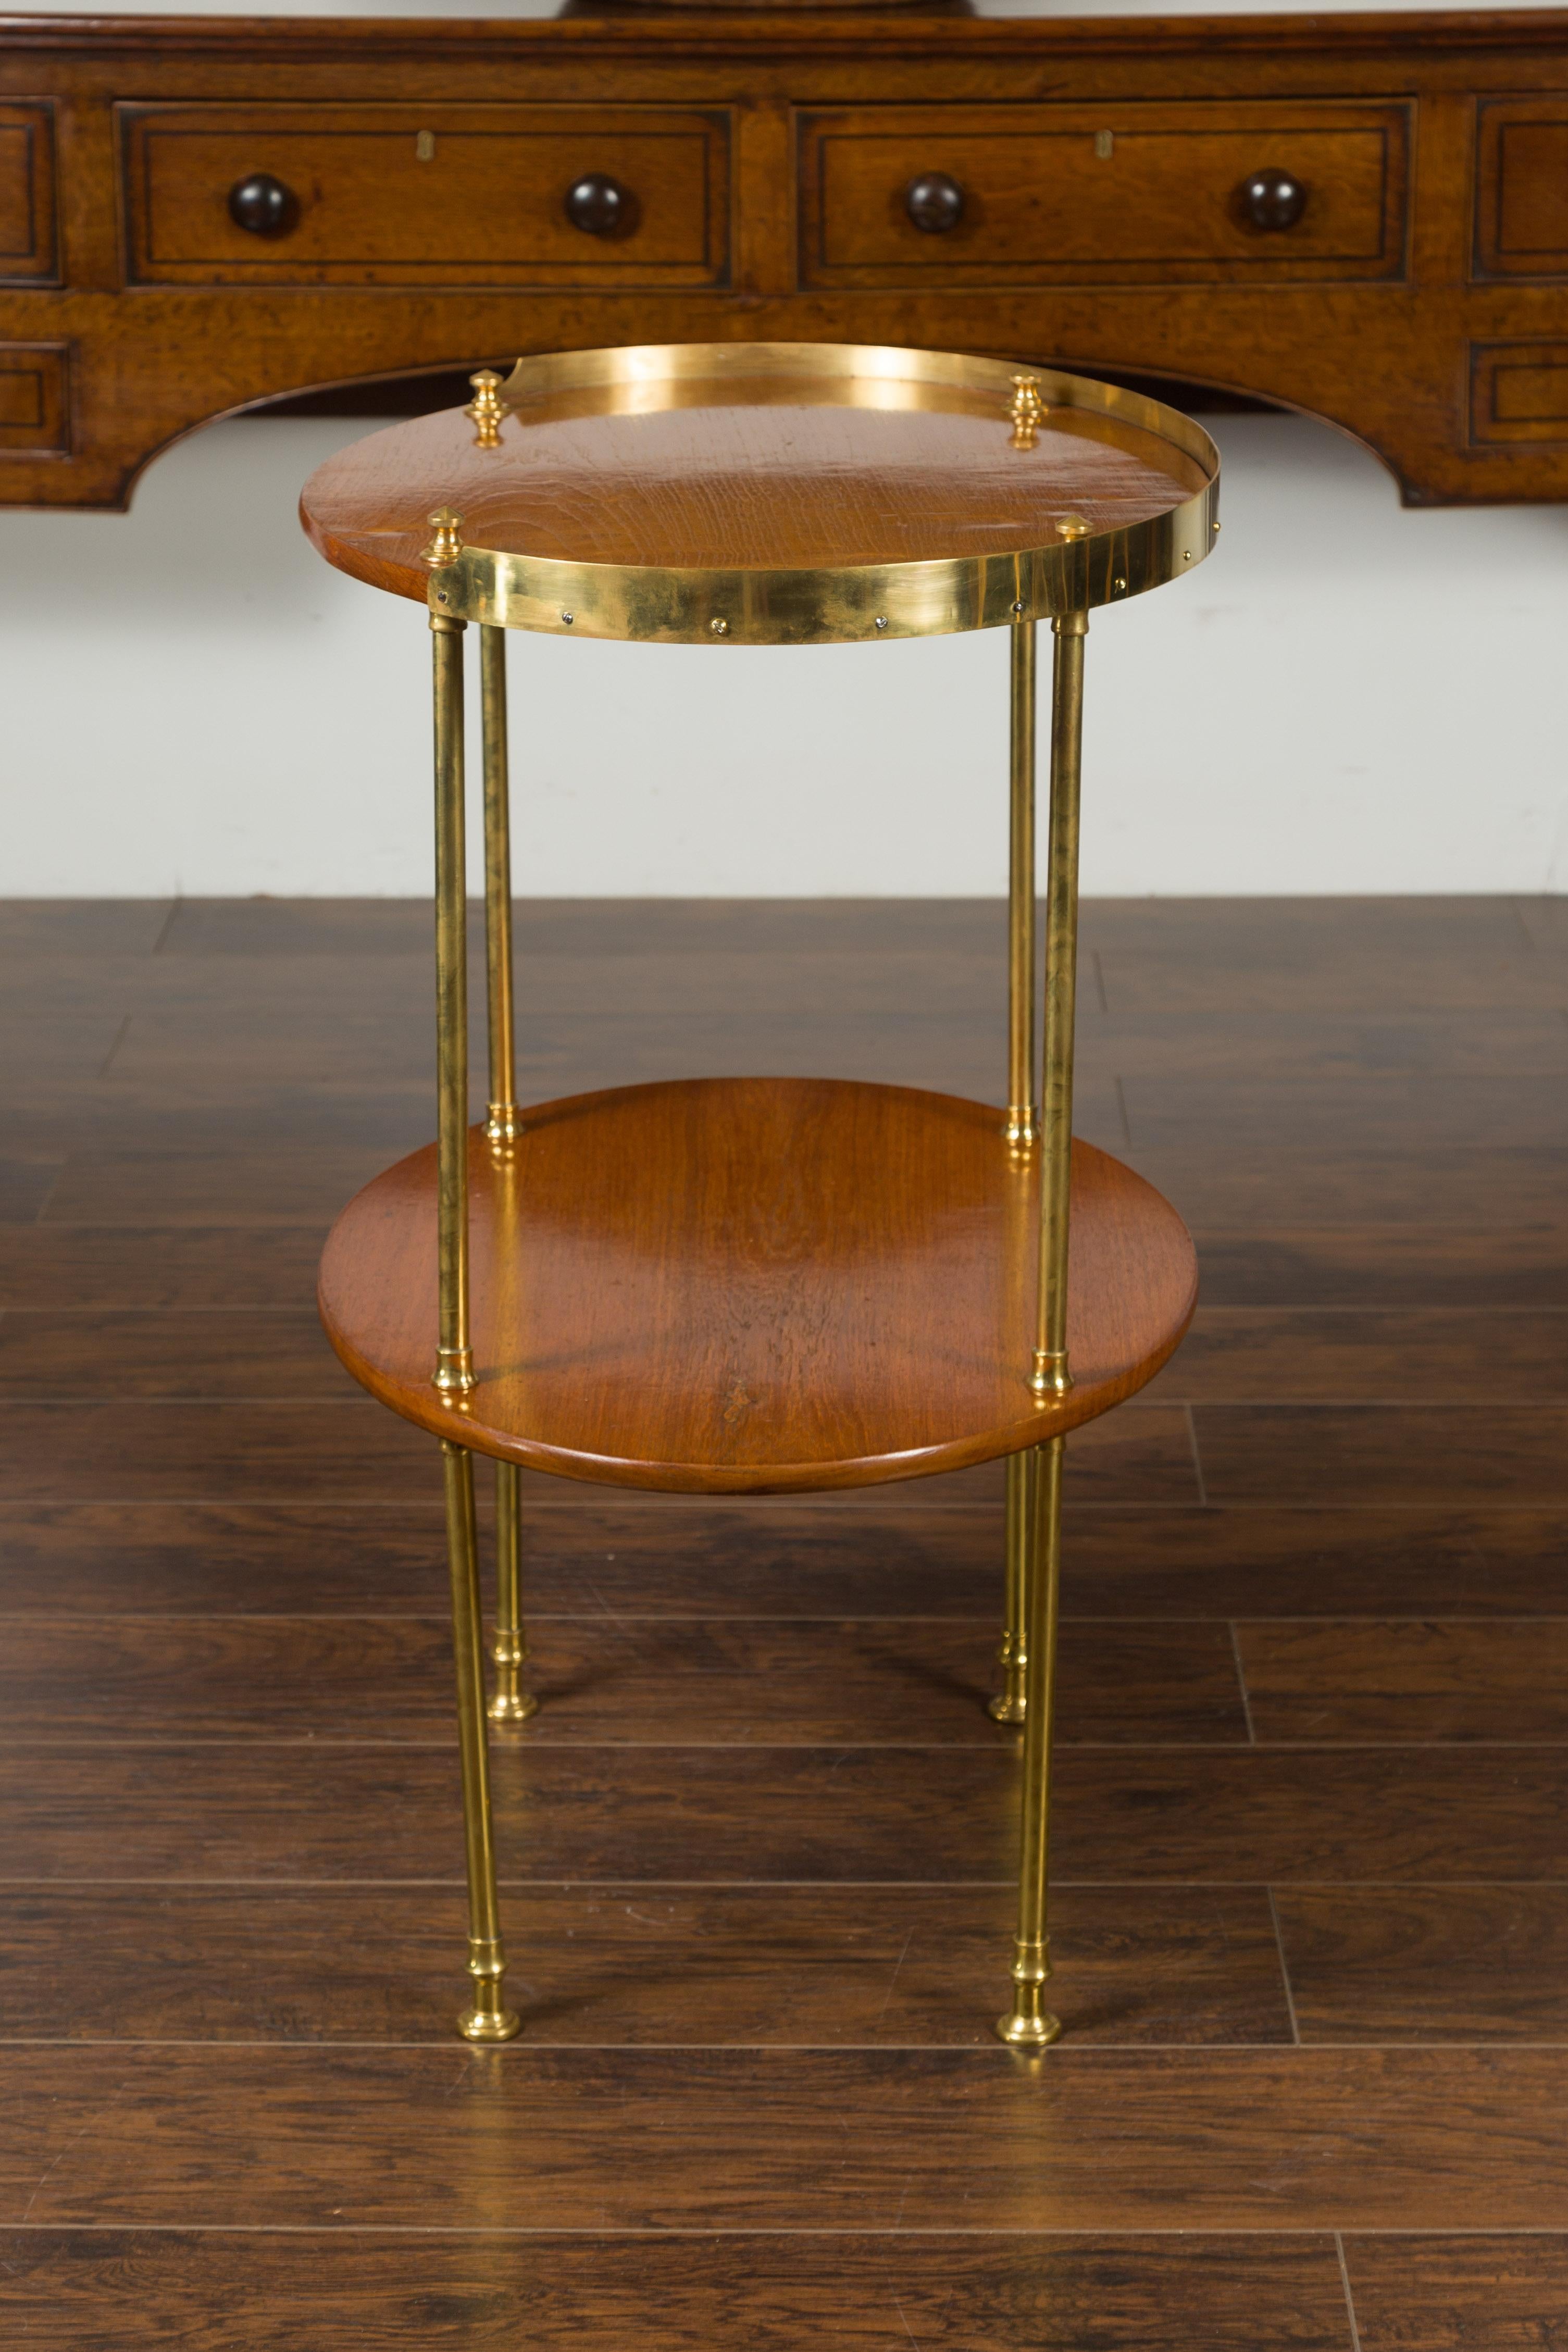 English Midcentury Mahogany Oval Two-Tiered Table with Brass Accents For Sale 7